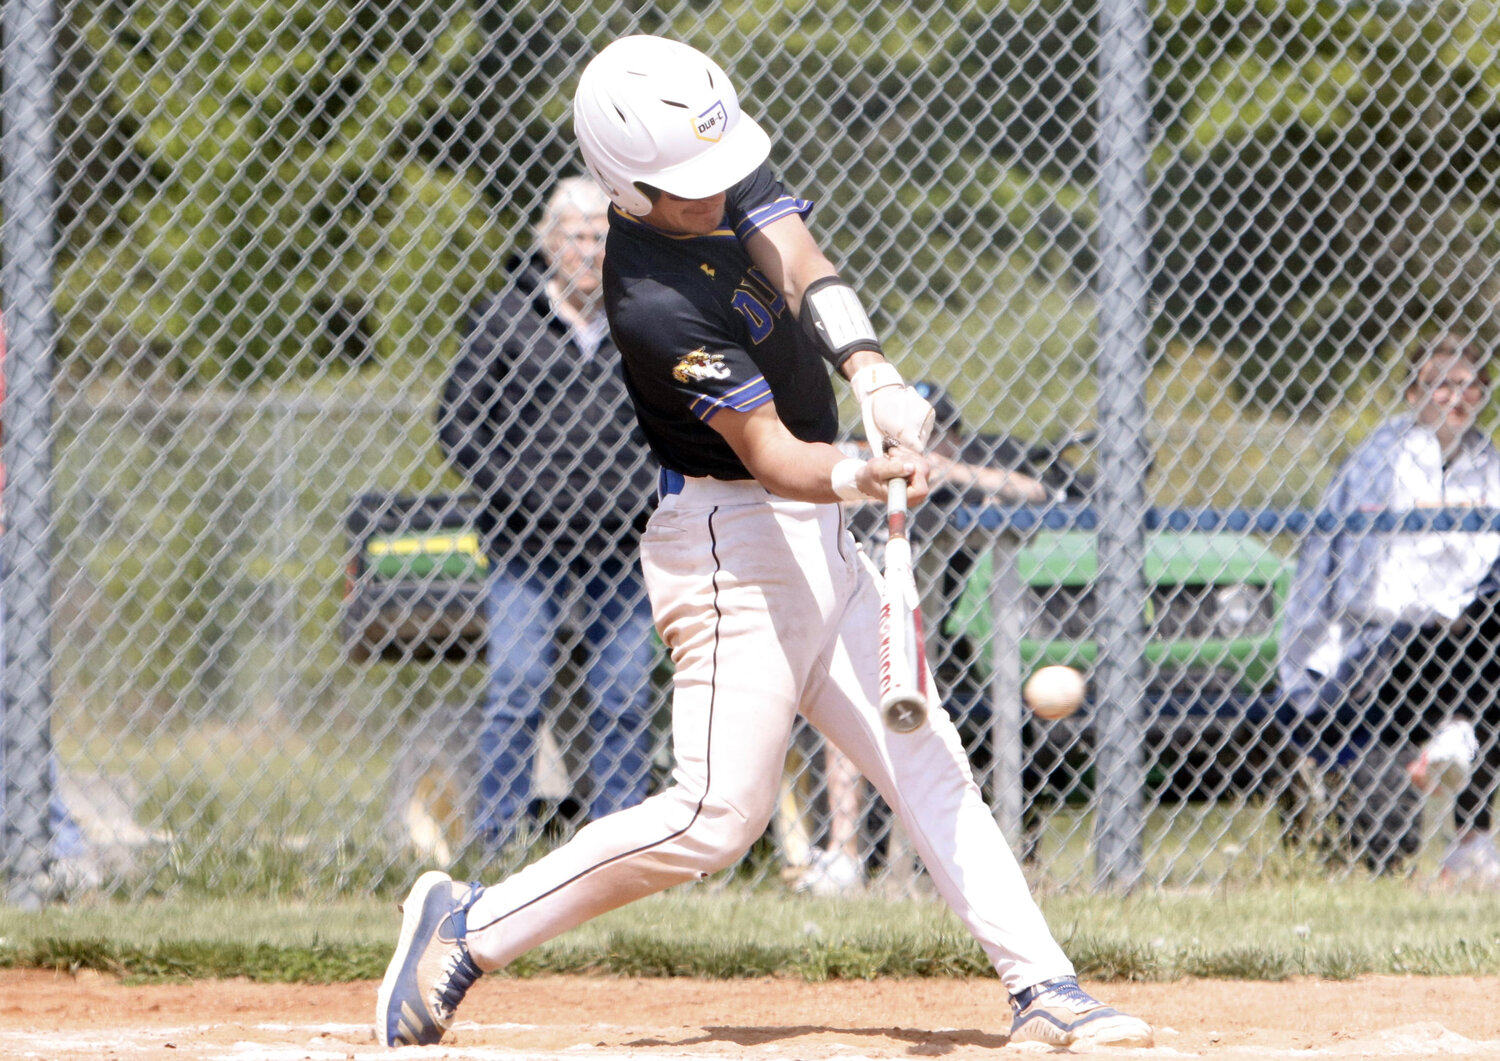 Blaine Niemann connects on a single during the third inning of Wright City's win.